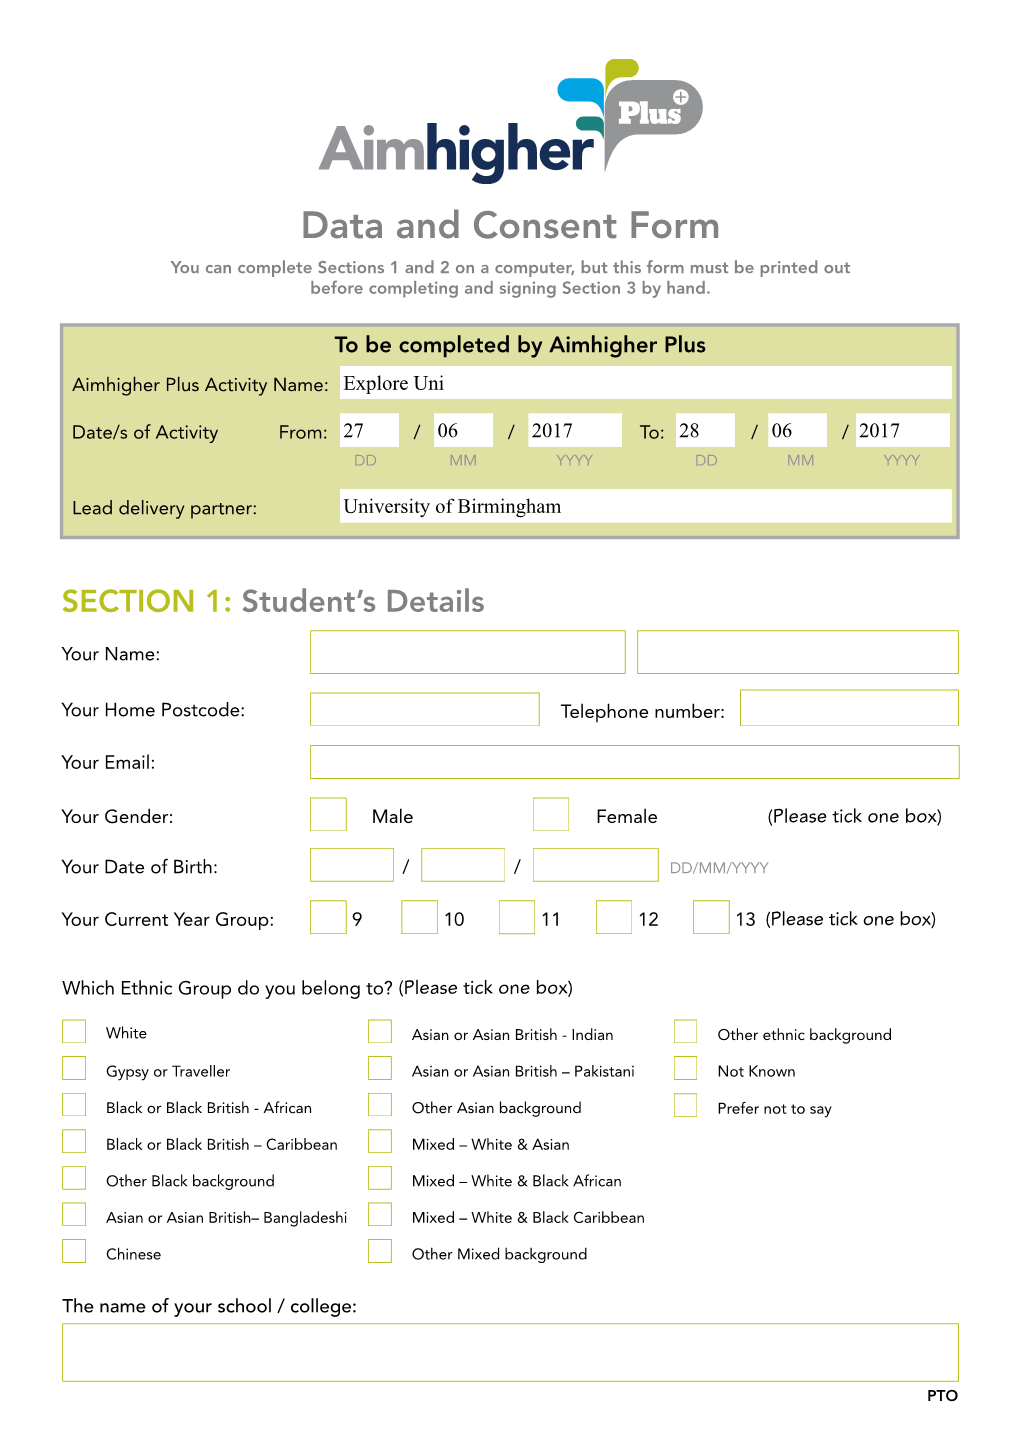 Data and Consent Form You Can Complete Sections 1 and 2 on a Computer, but This Form Must Be Printed out Before Completing and Signing Section 3 by Hand